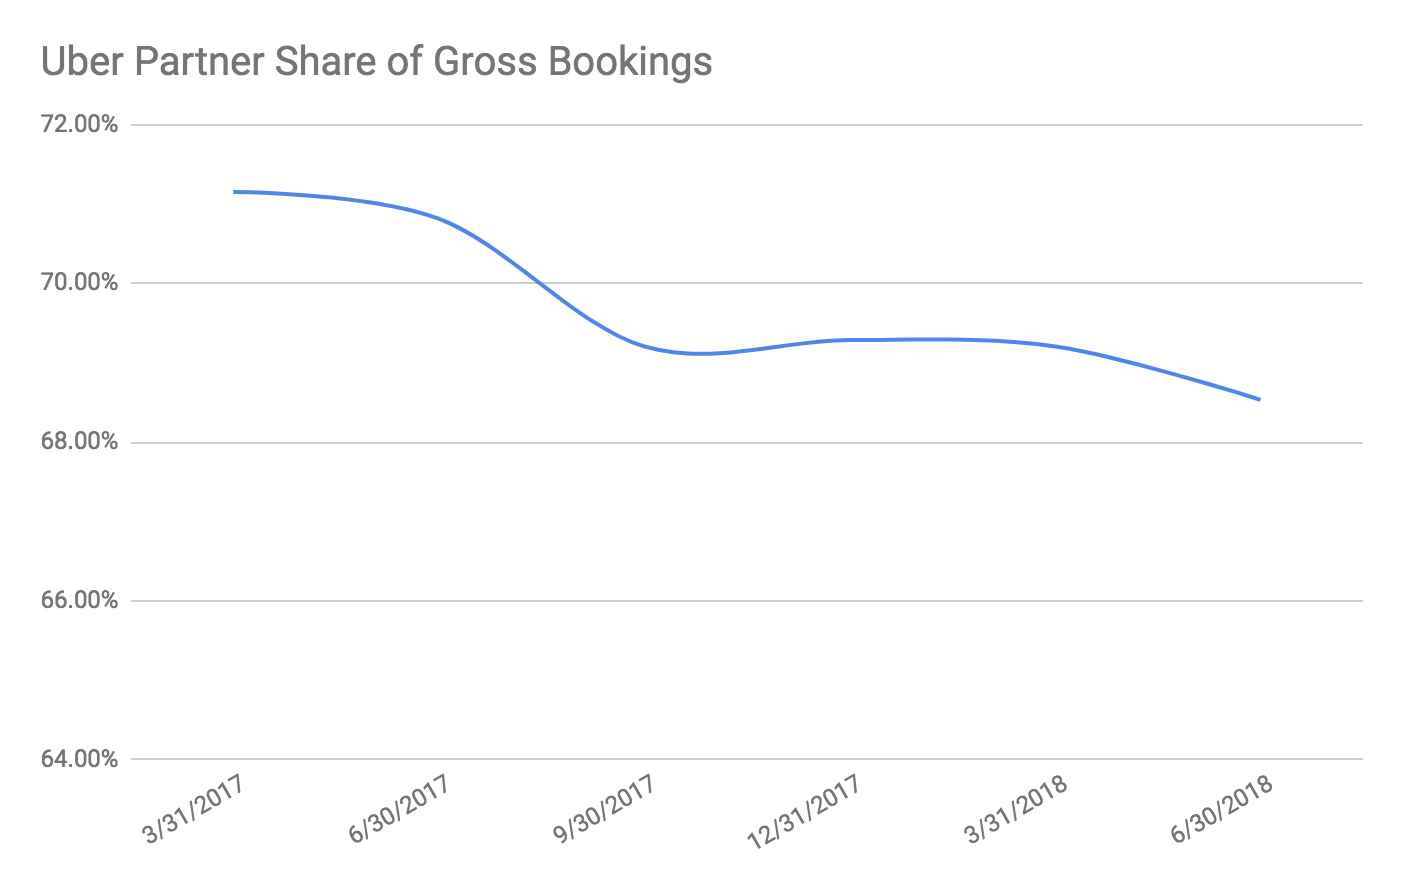 Estimated share of gross bookings that Uber partners, drivers, get to keep